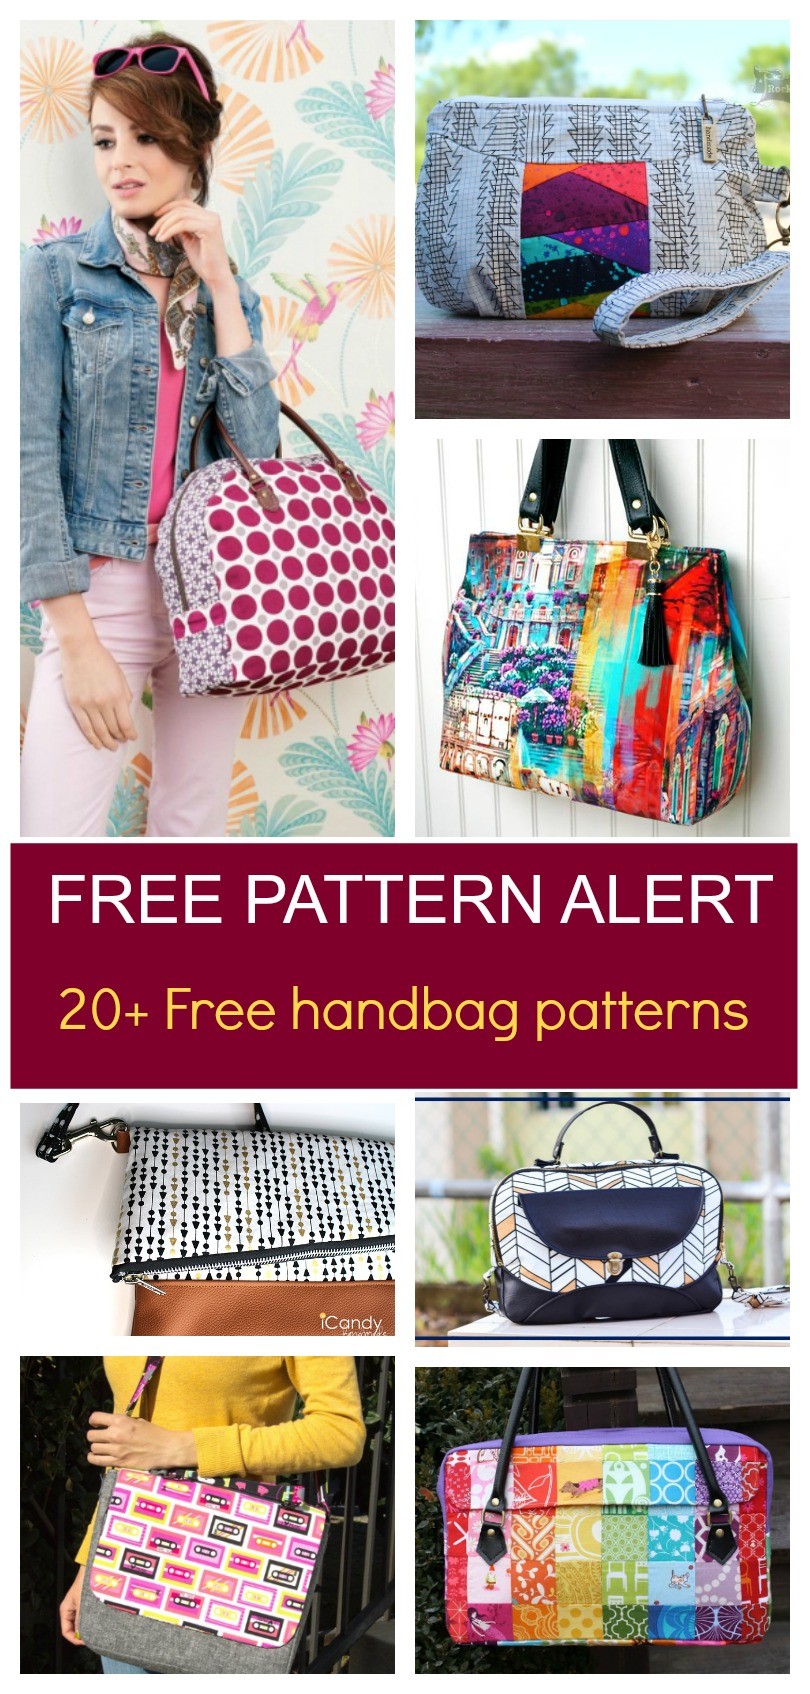 The Bowler Bag Pattern from Sewing Patterns by Mrs H Sewing Patterns by Mrs  H